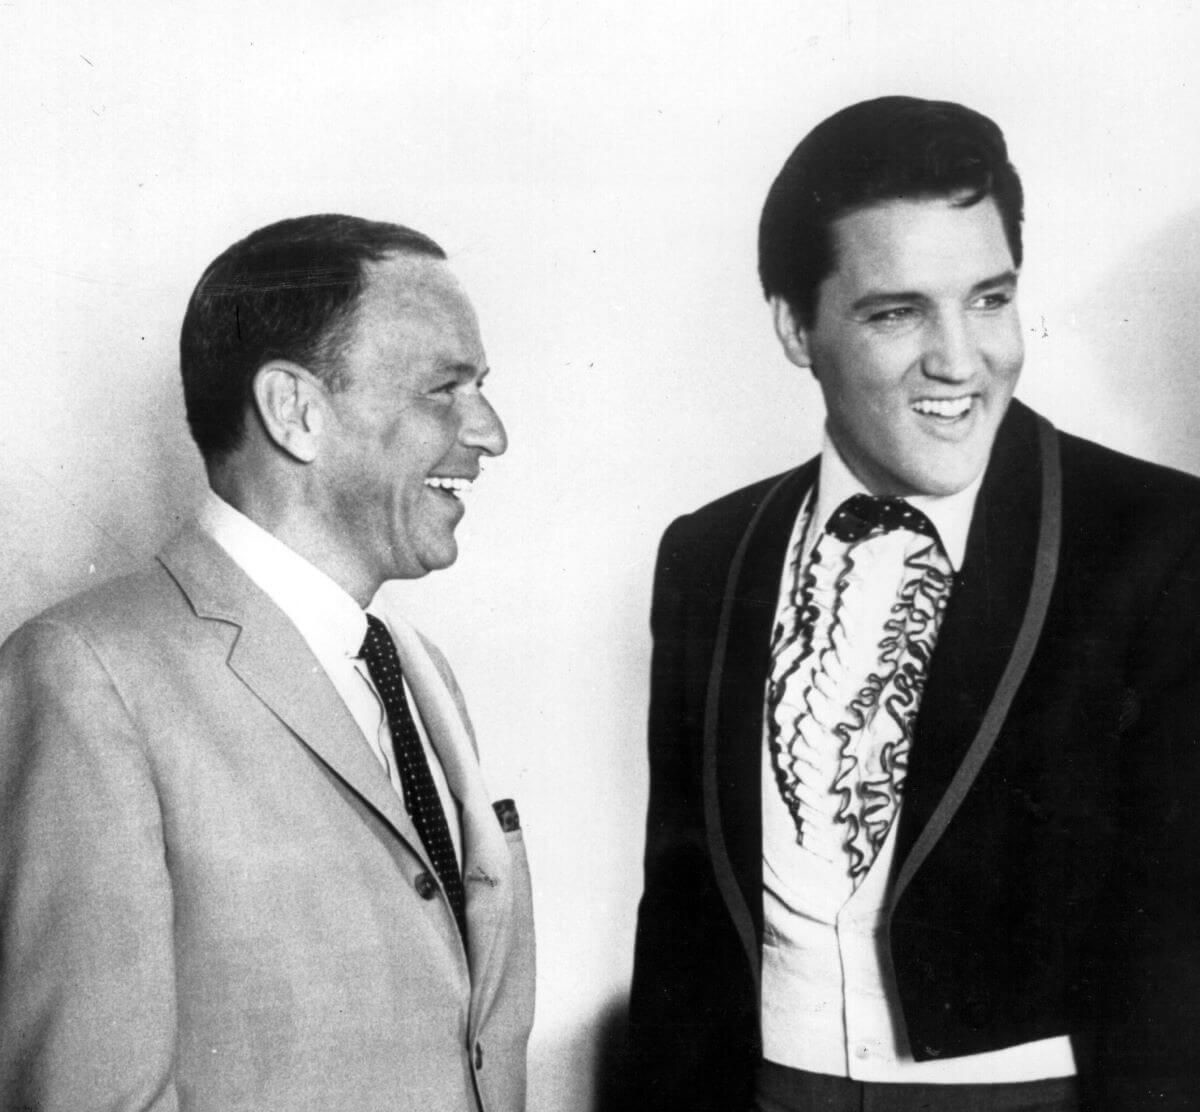 A black and white picture of Frank Sinatra and Elvis standing together. They both wear suits.